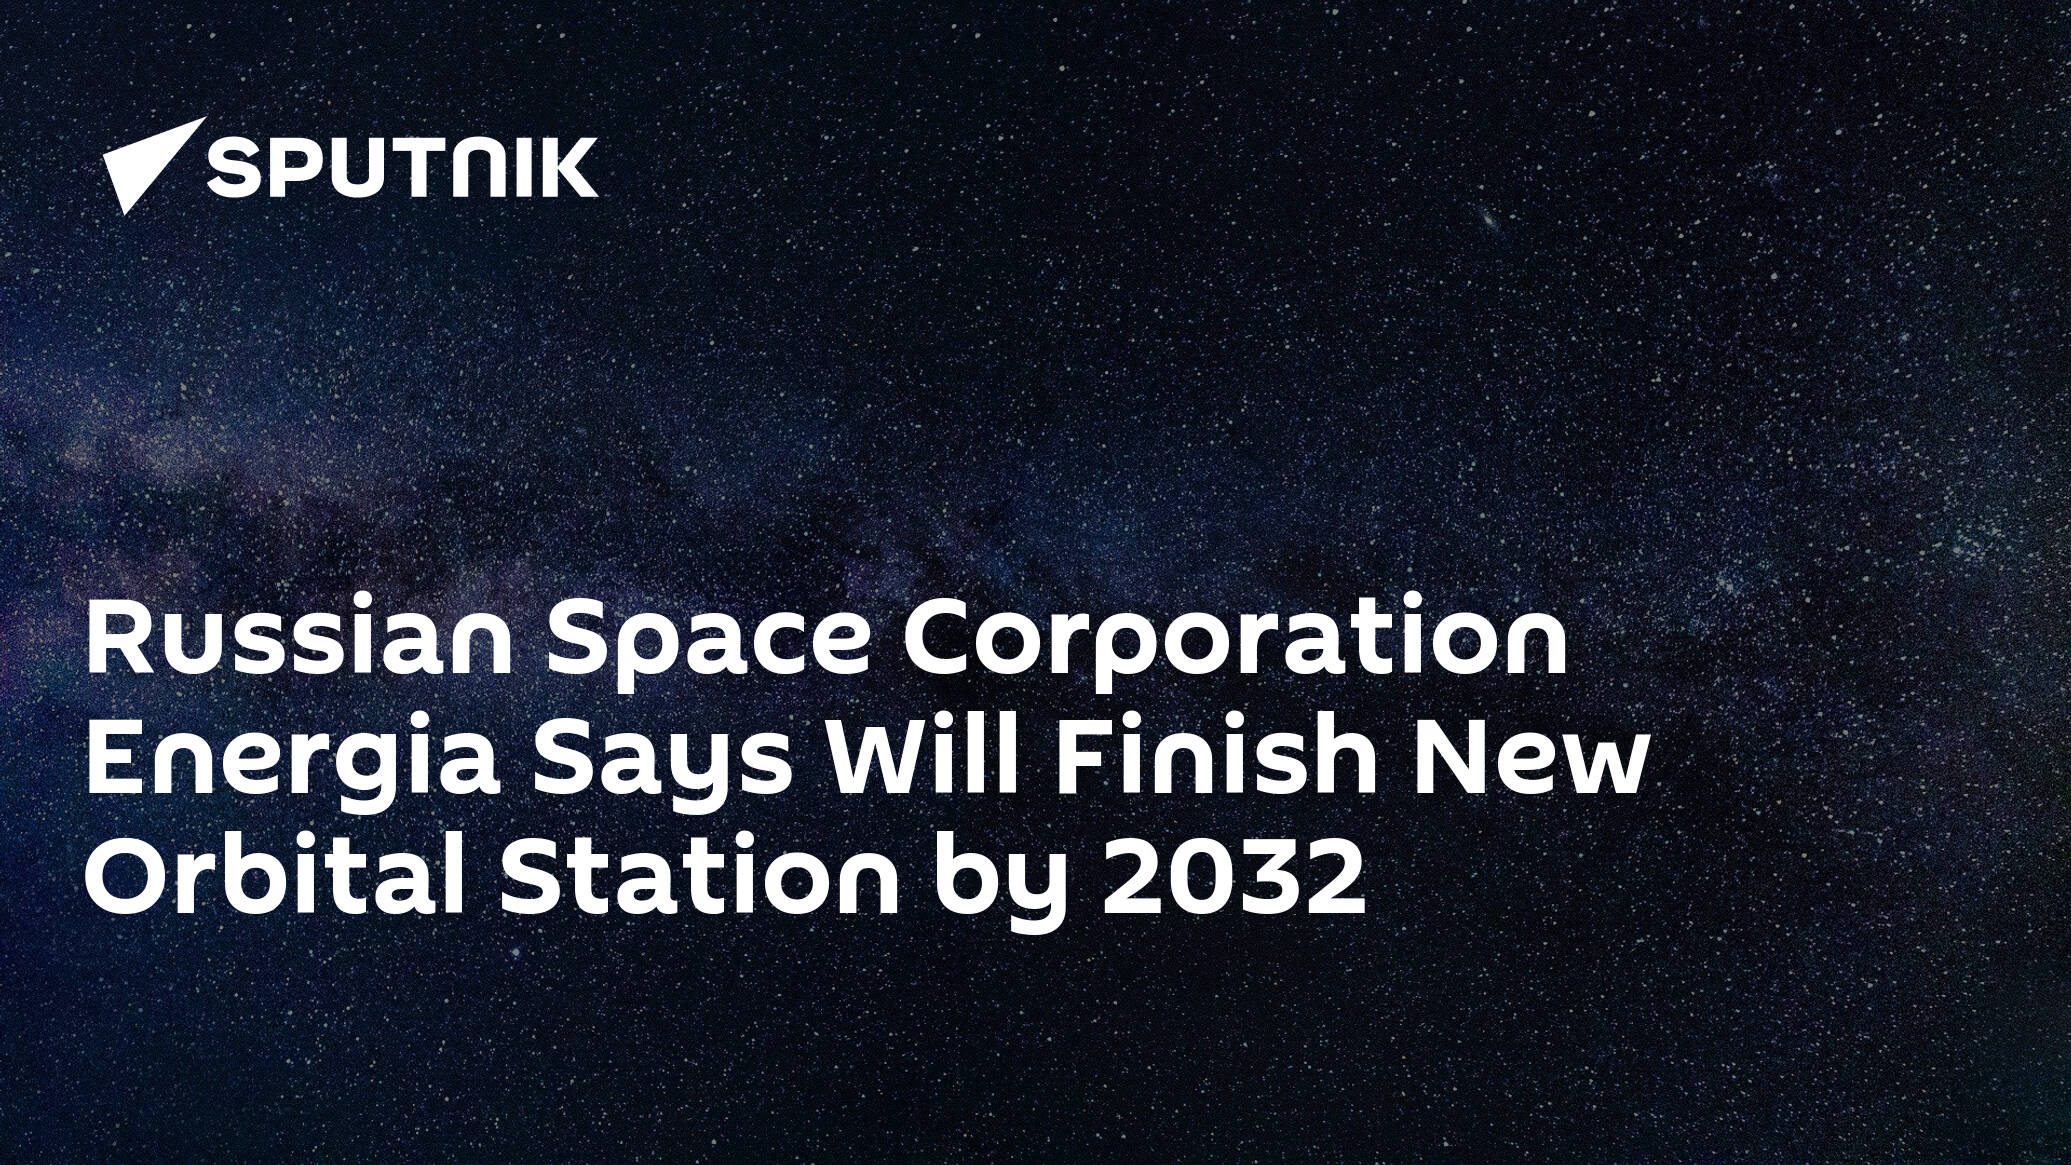 Russian Space Corporation Energia Says Will Finish New Orbital Station by 2032